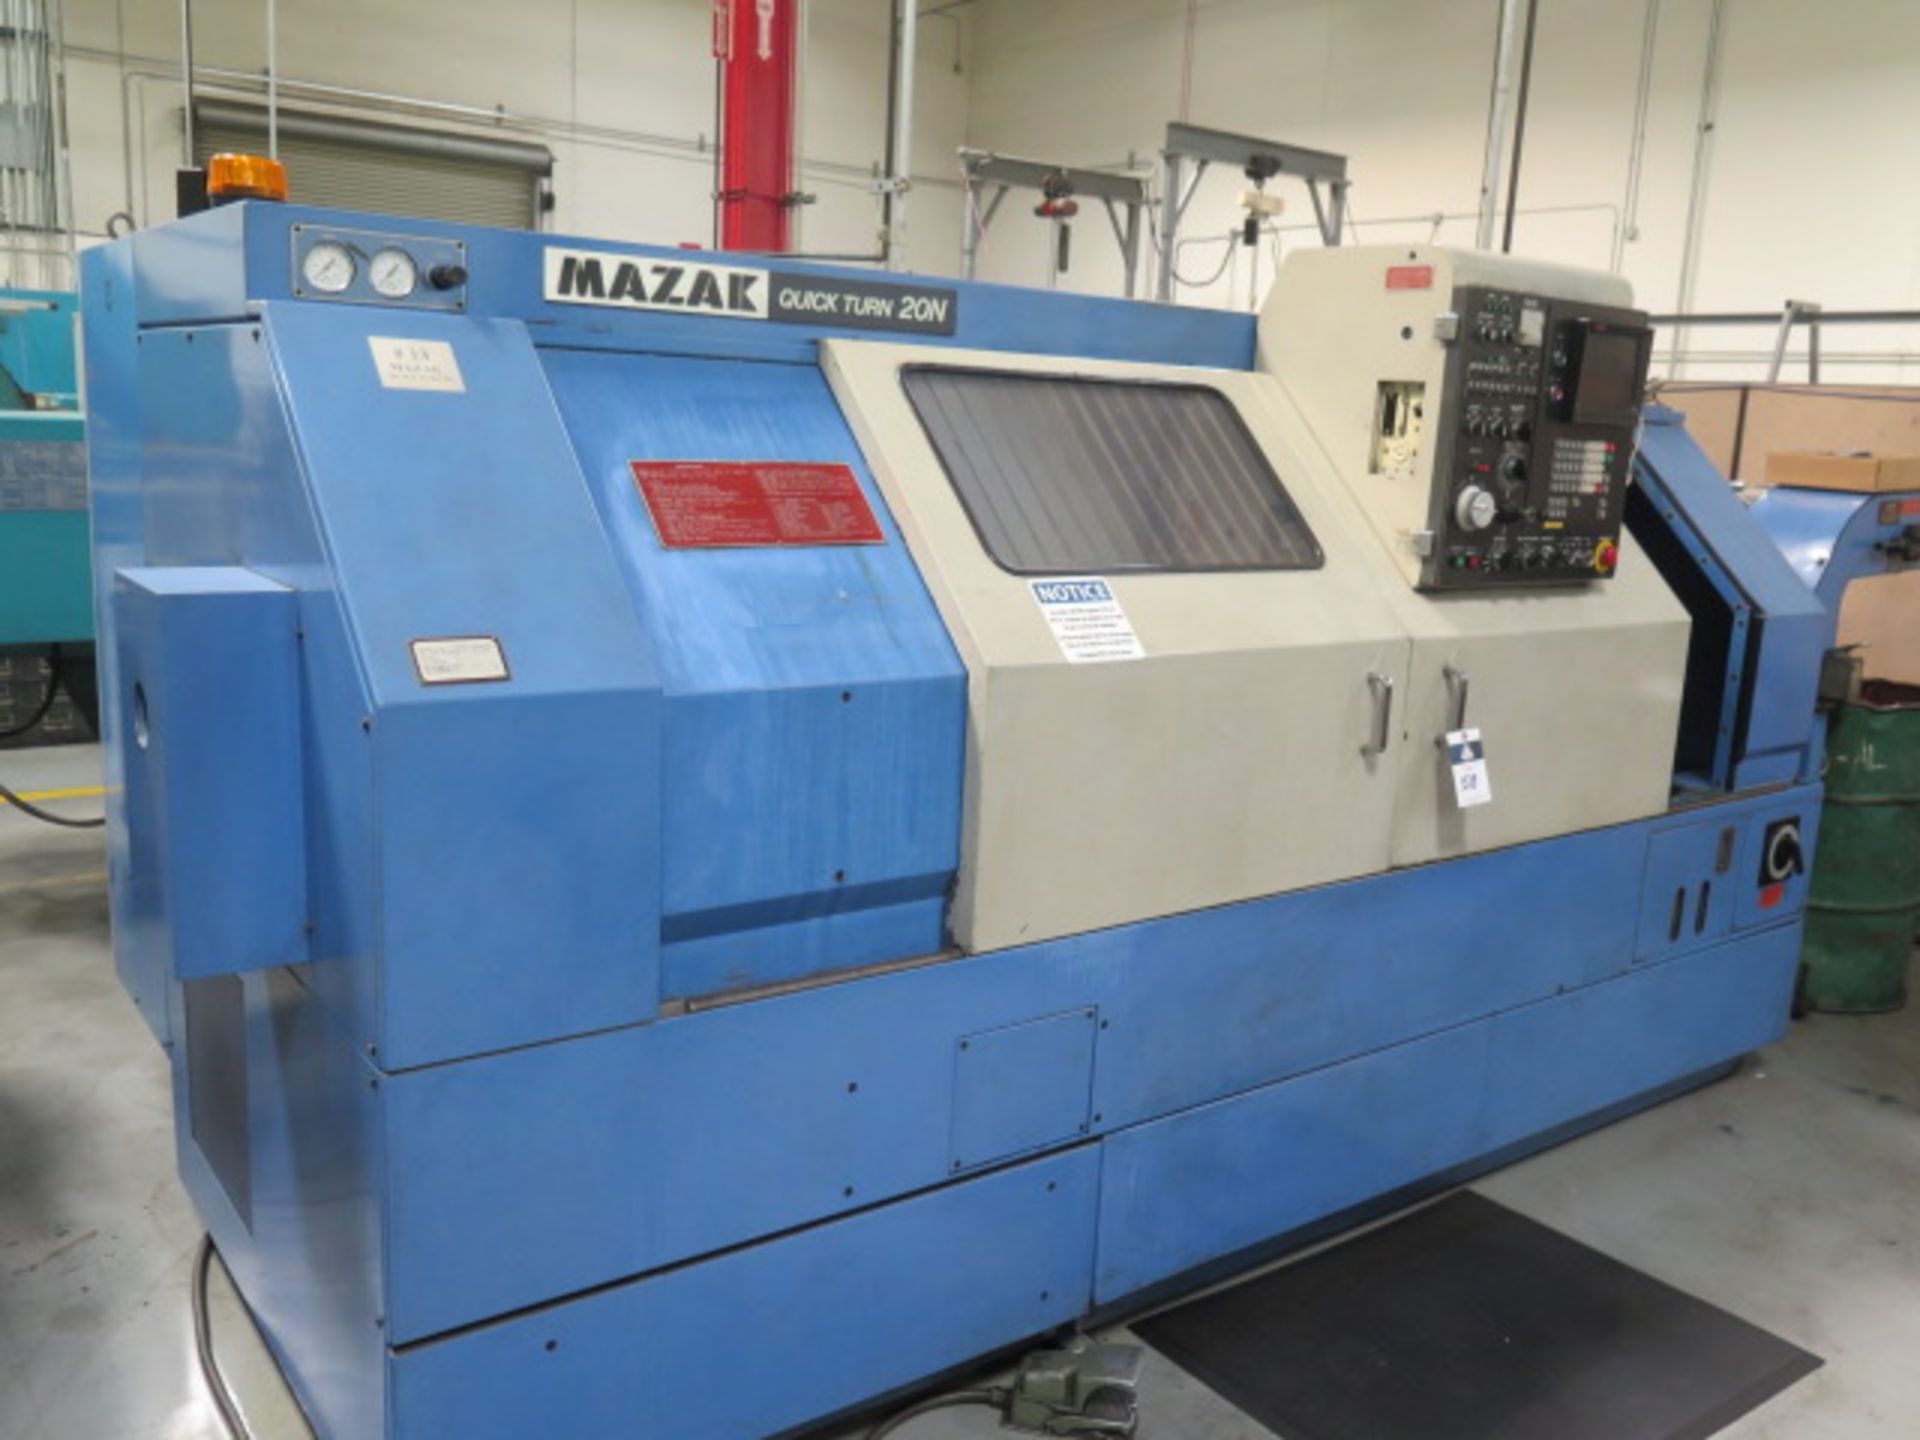 Mazak Quick Turn 20N CNC Turning Center w/ Fanuc System 10T Controls, Tool Presetter, SOLD AS IS - Image 2 of 14